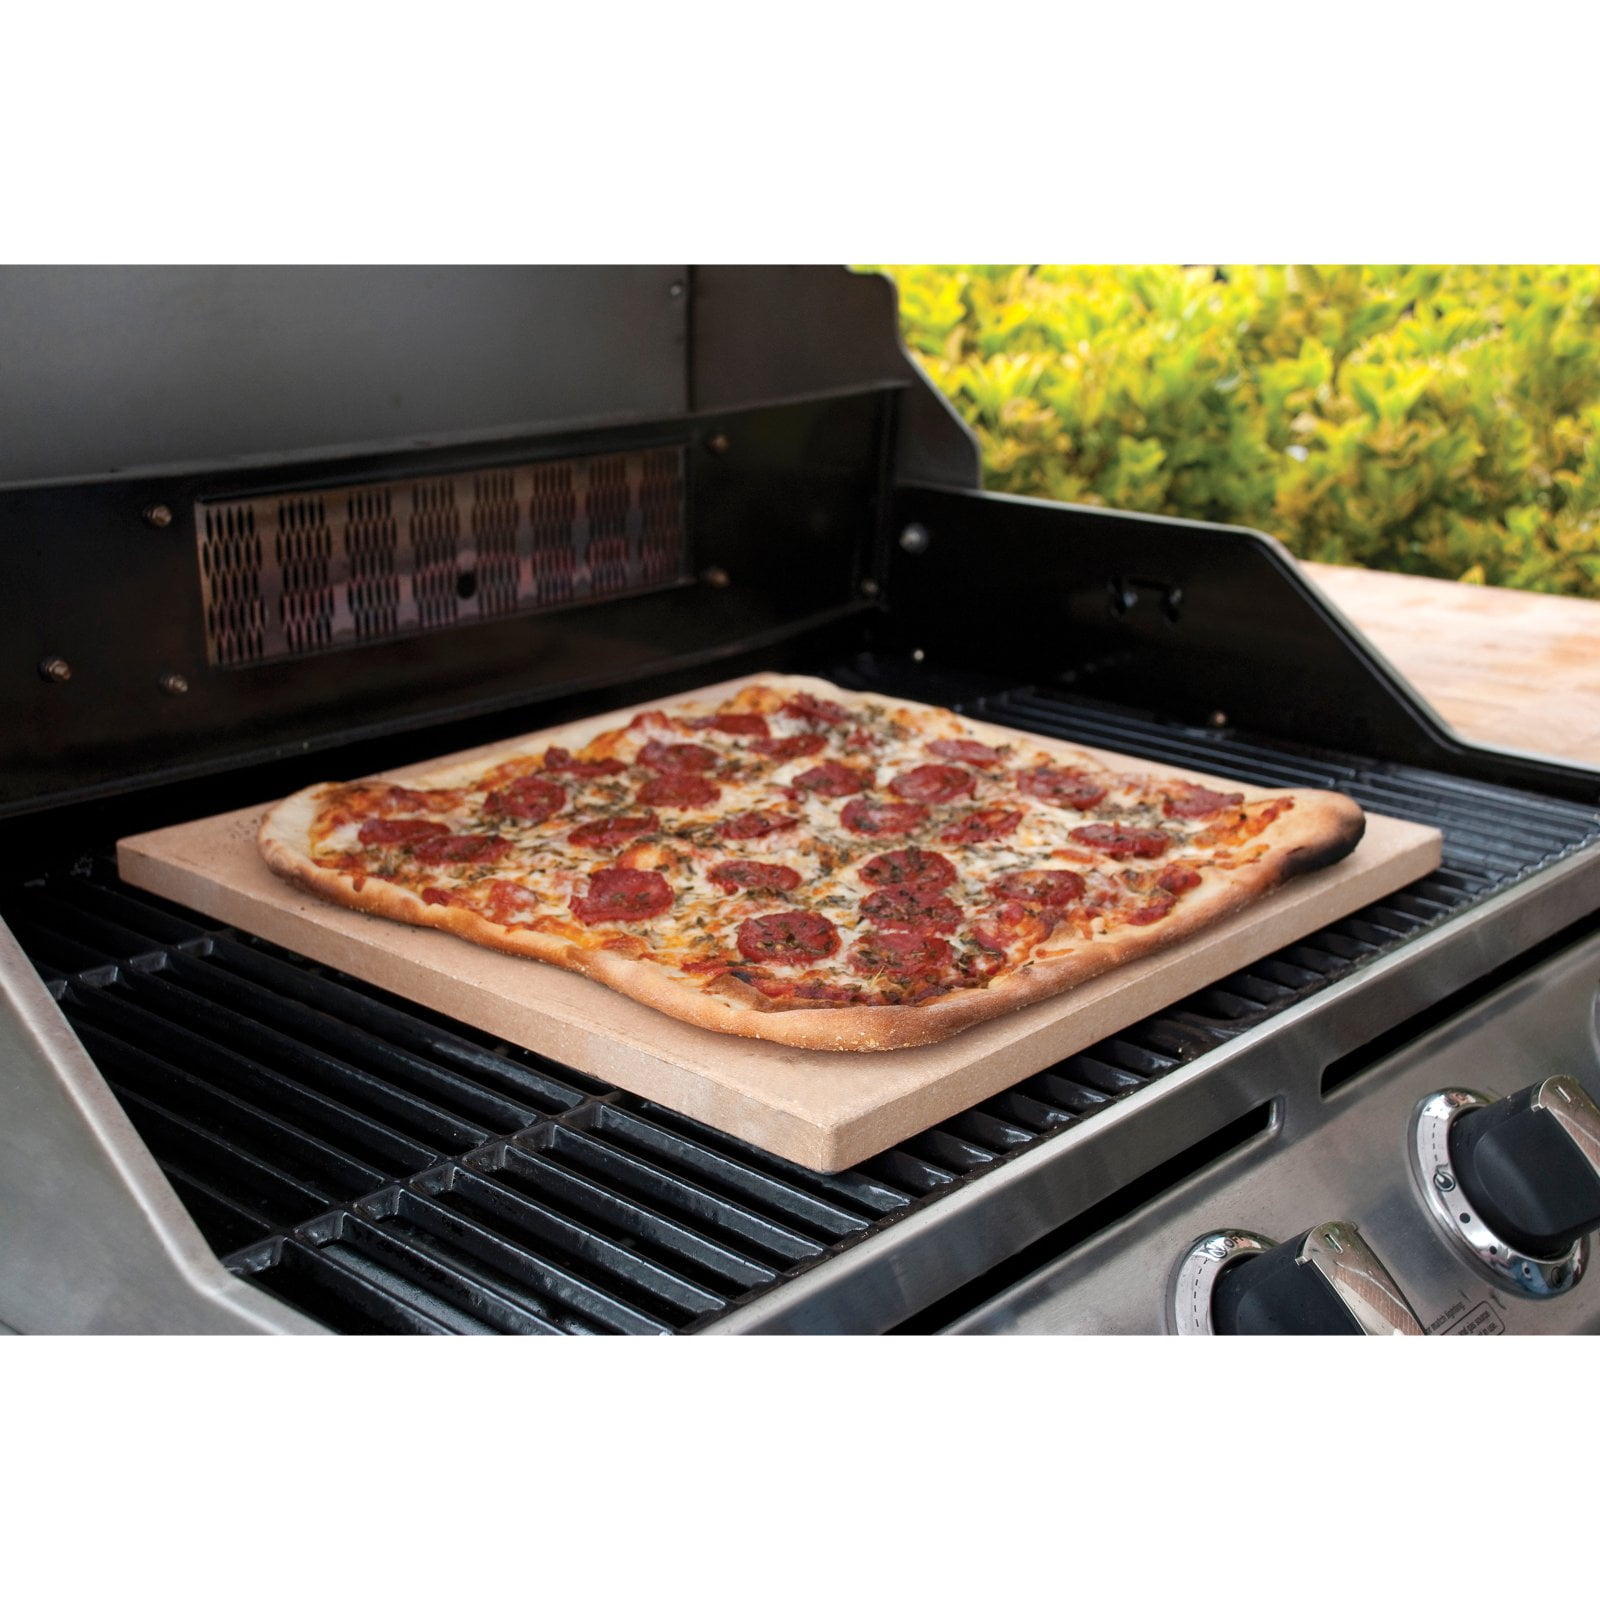 Pizza Stone by  Baking & Grilling Stone for Oven and Grill/BBQ Rectangular 